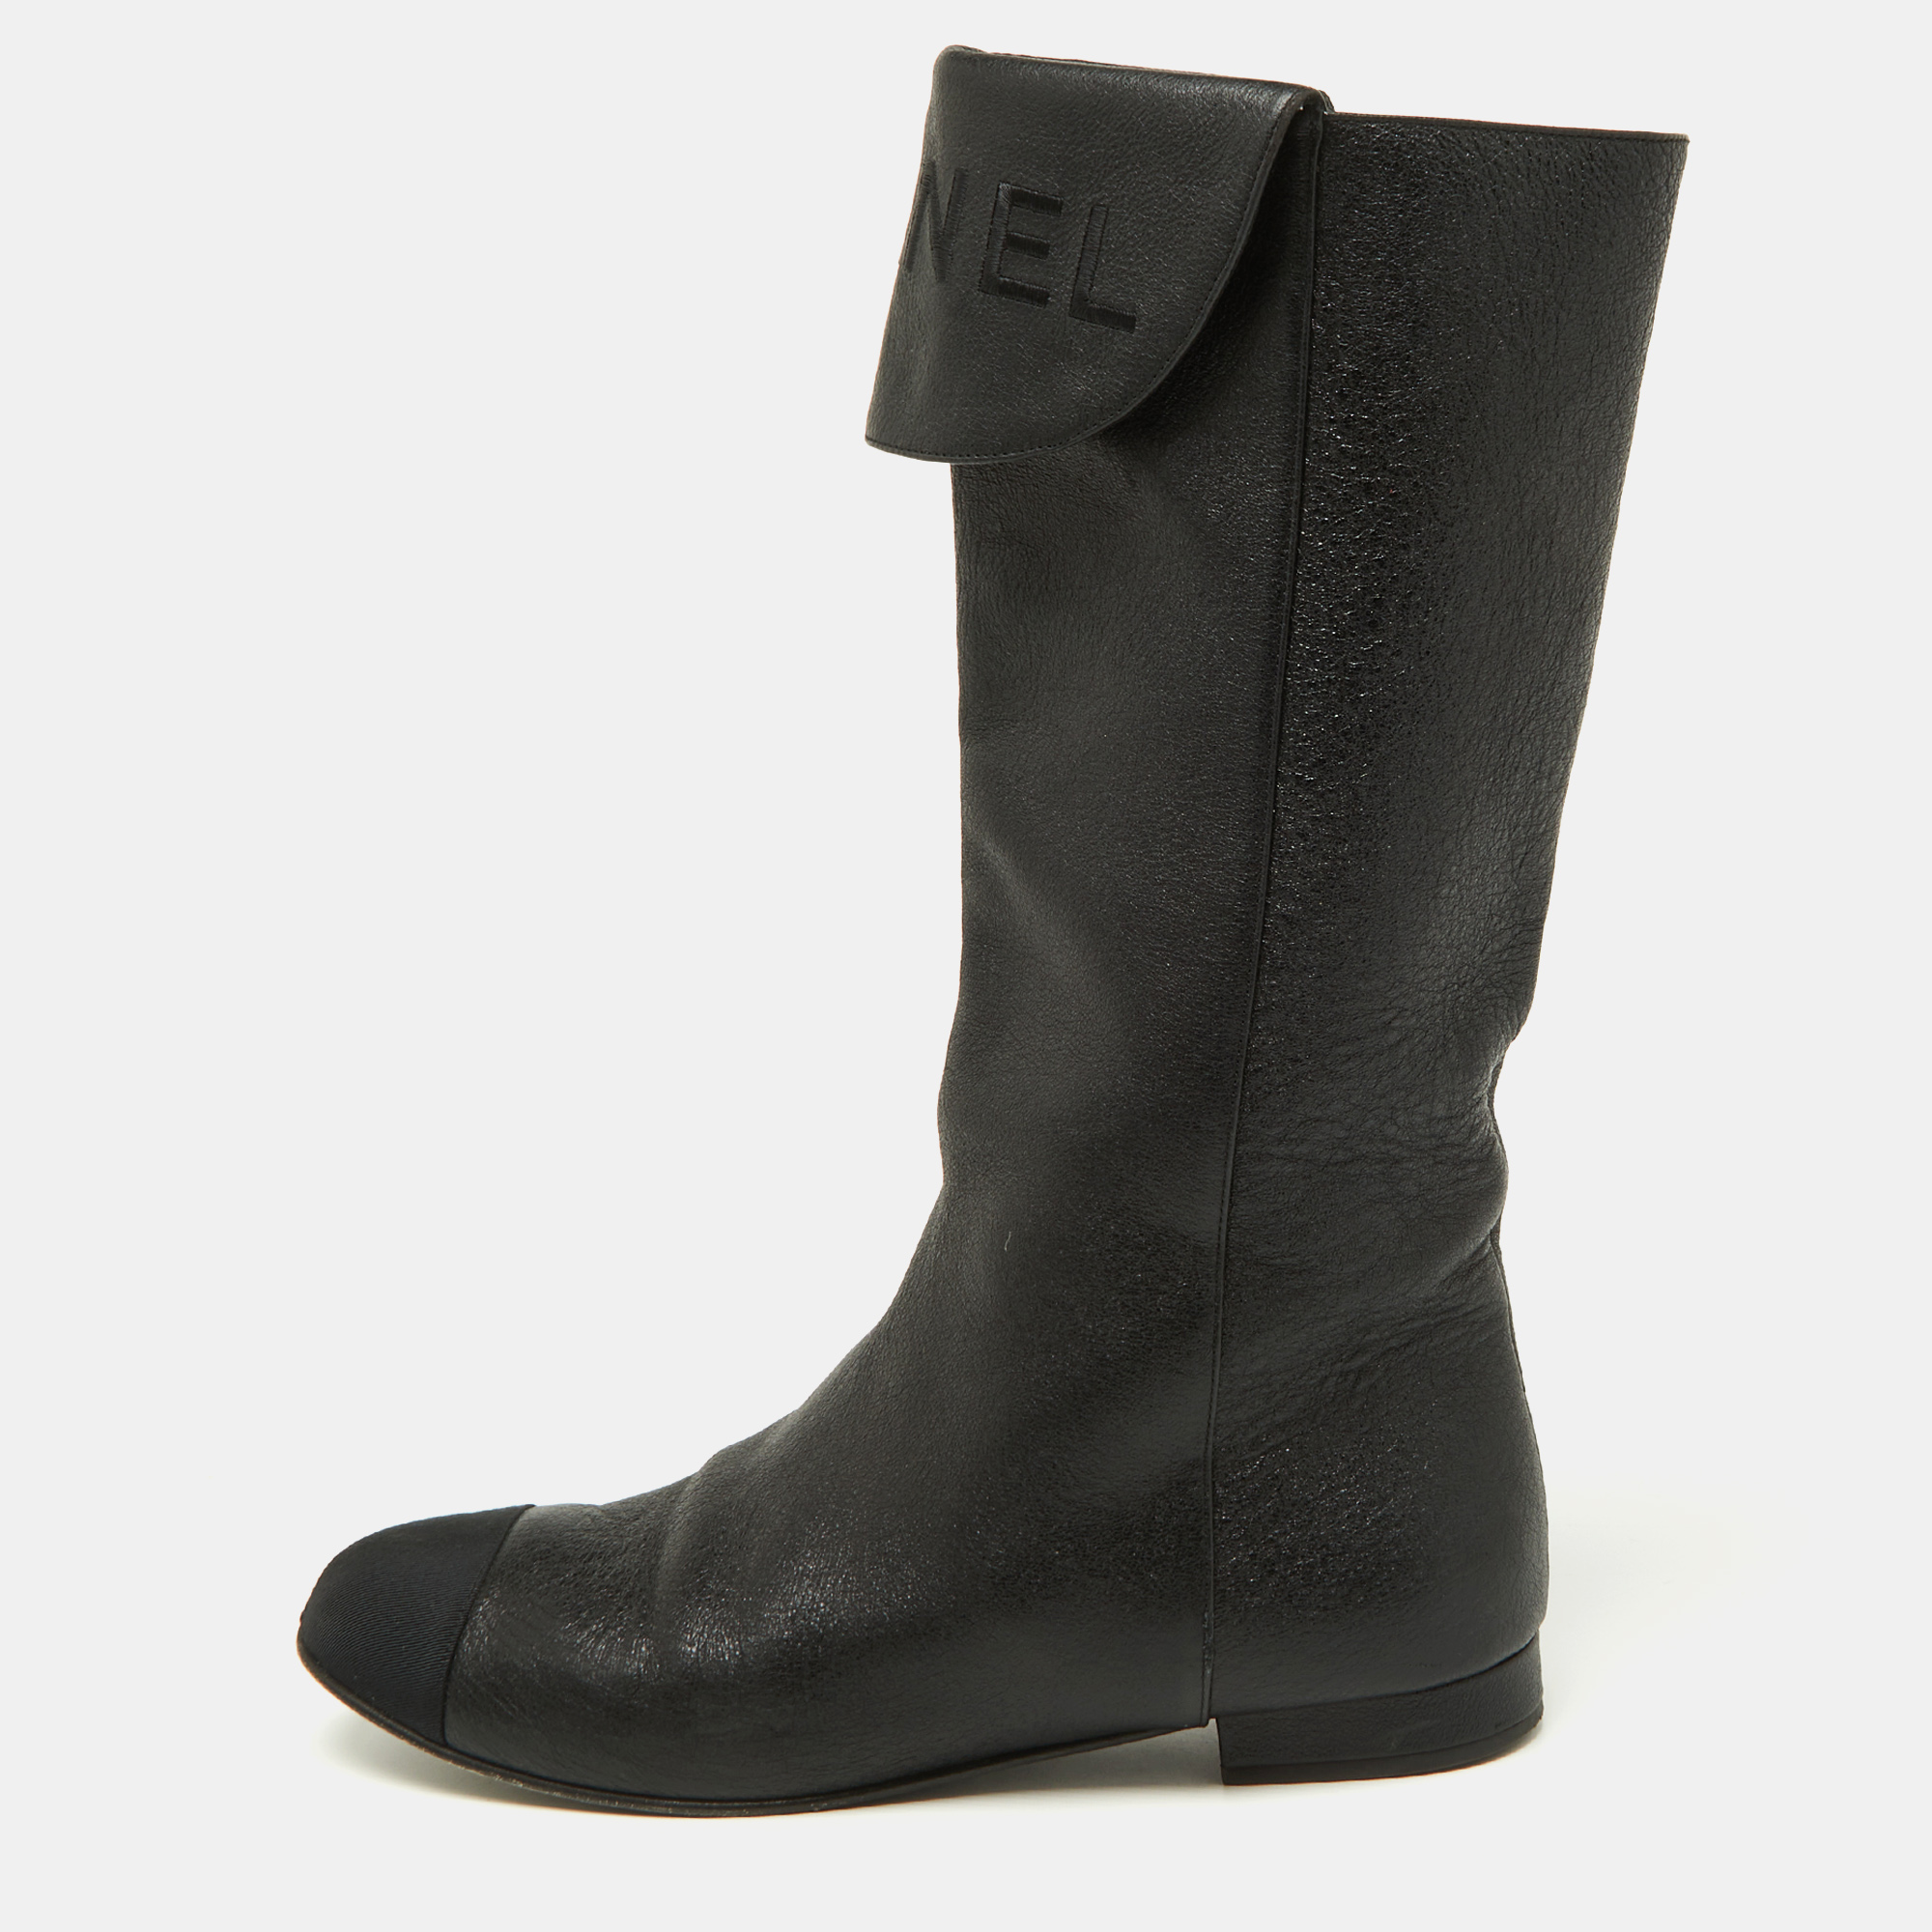 Chanel black leather and grosgrain mid calf boots size 37.5